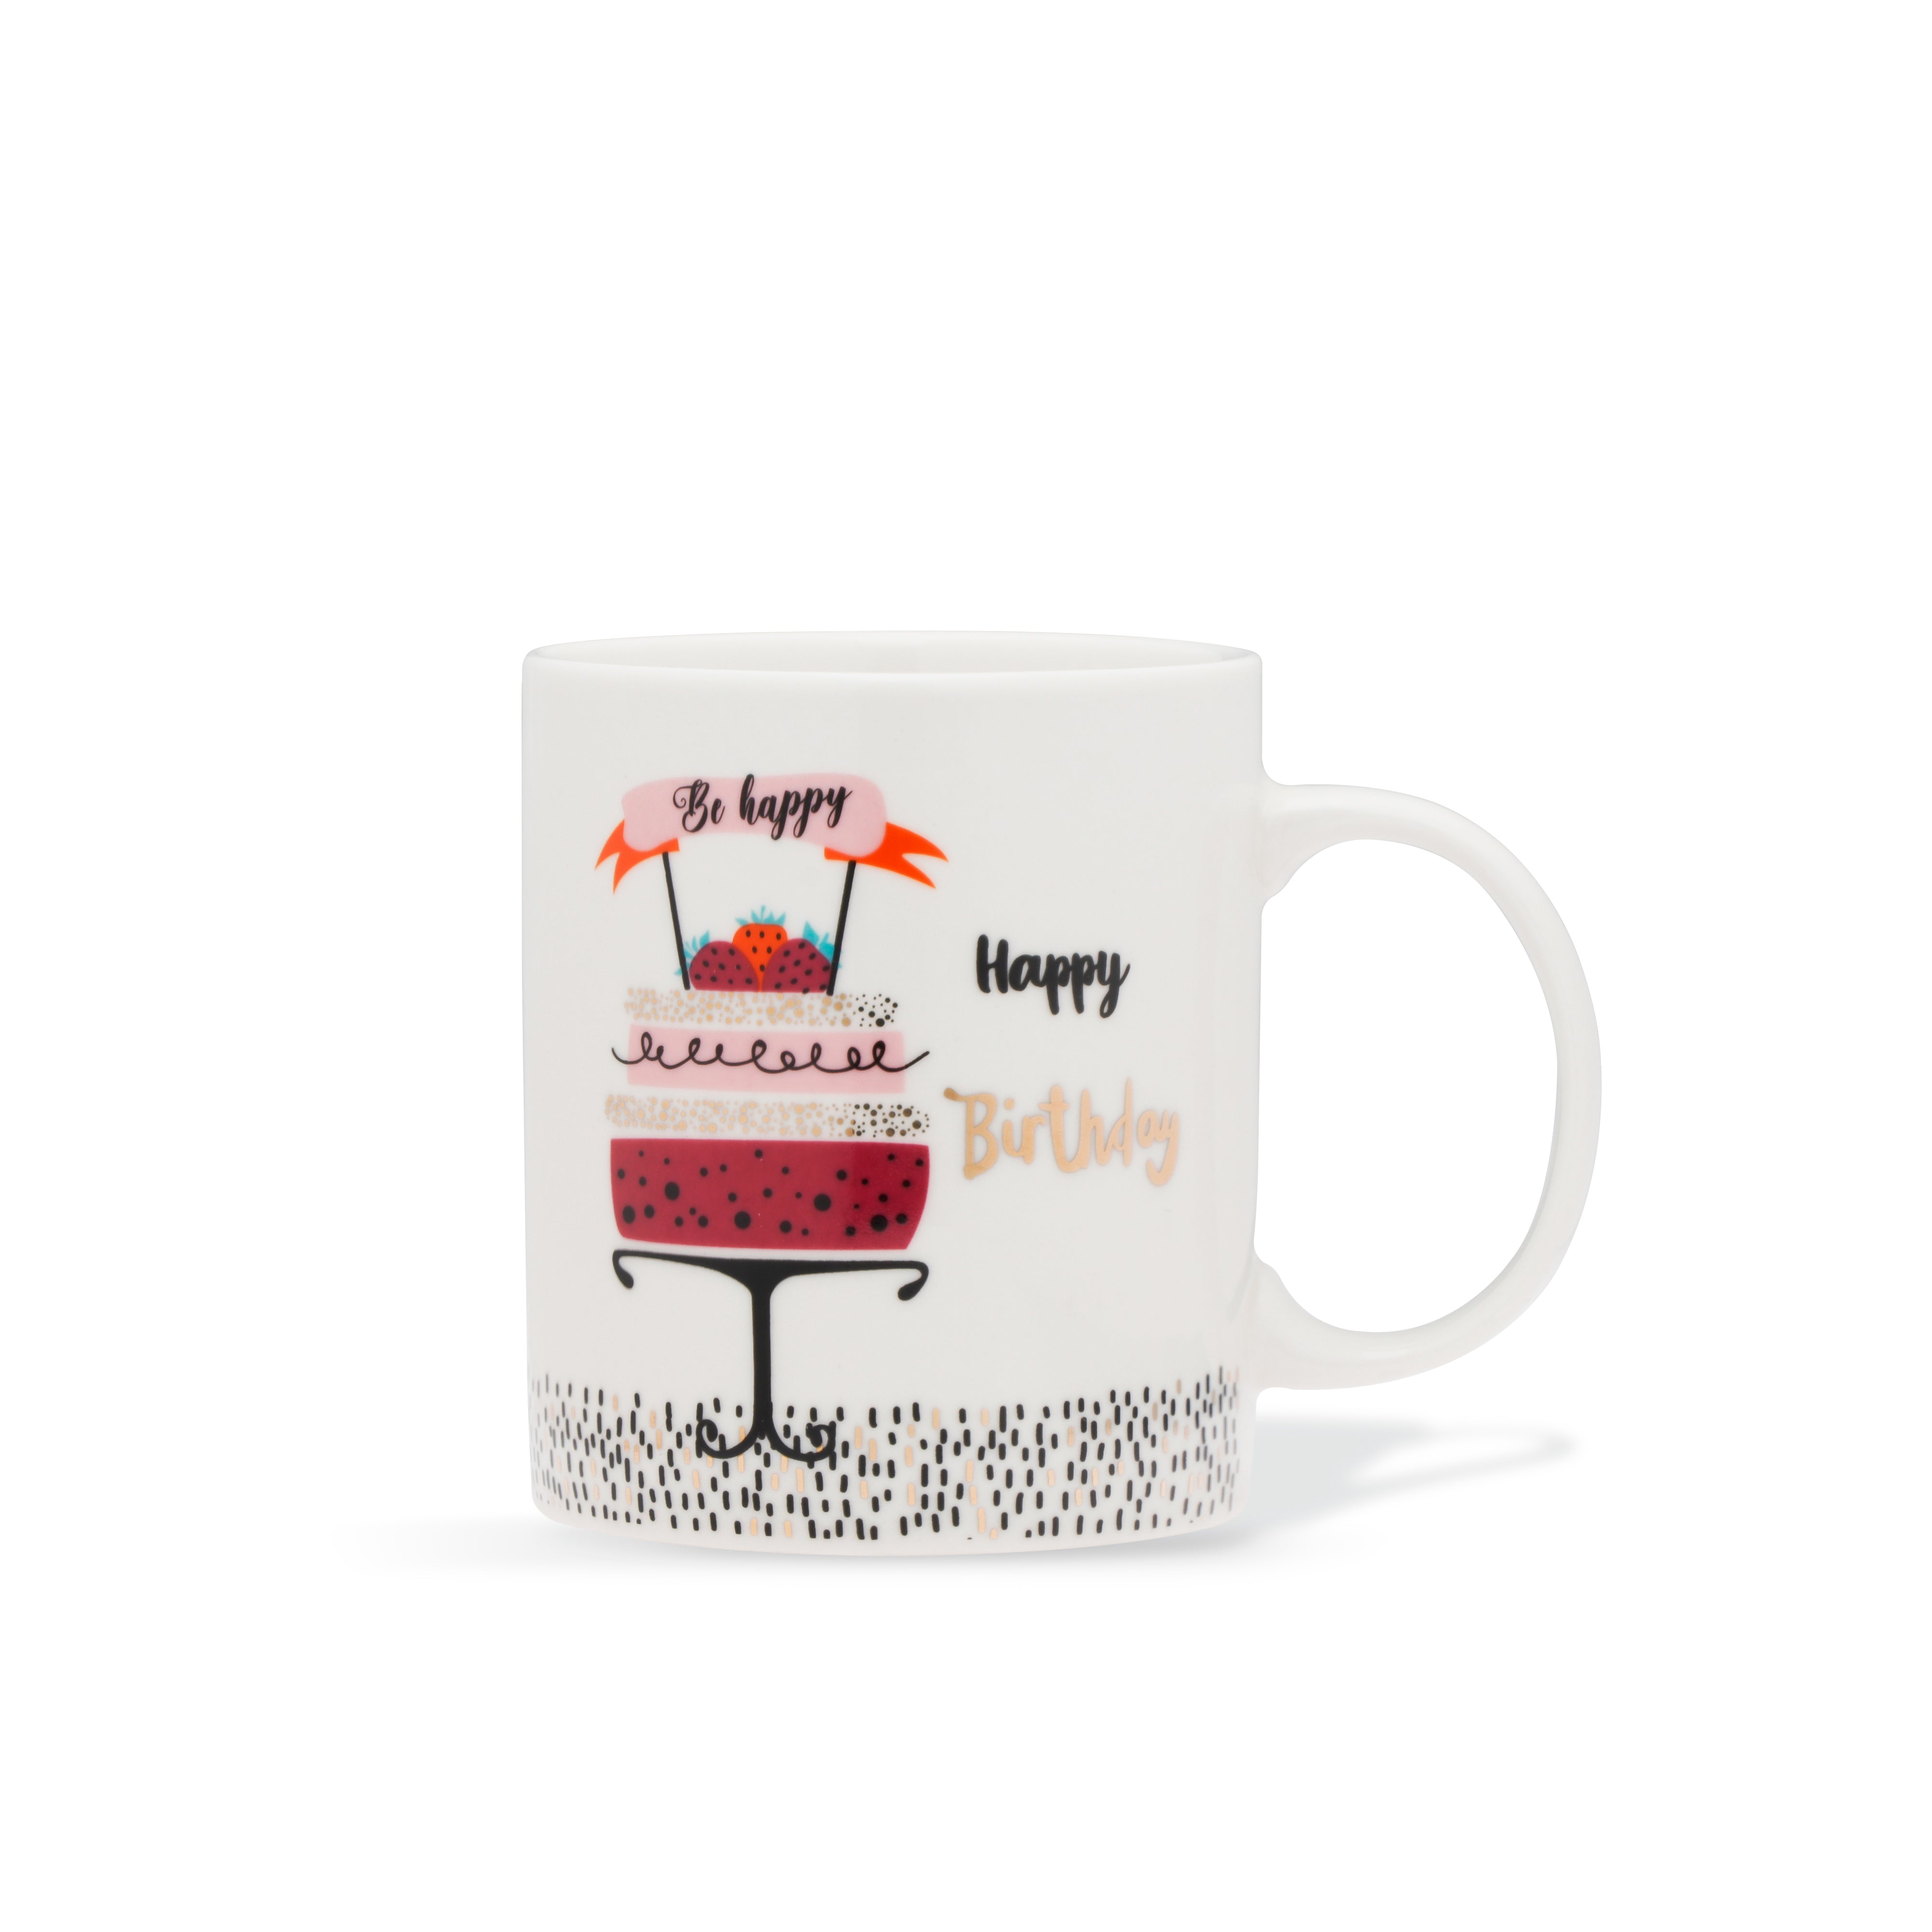 Archies | Archies ceremic Birthday  coffee mug with beautifull cake  printed for gifting someone